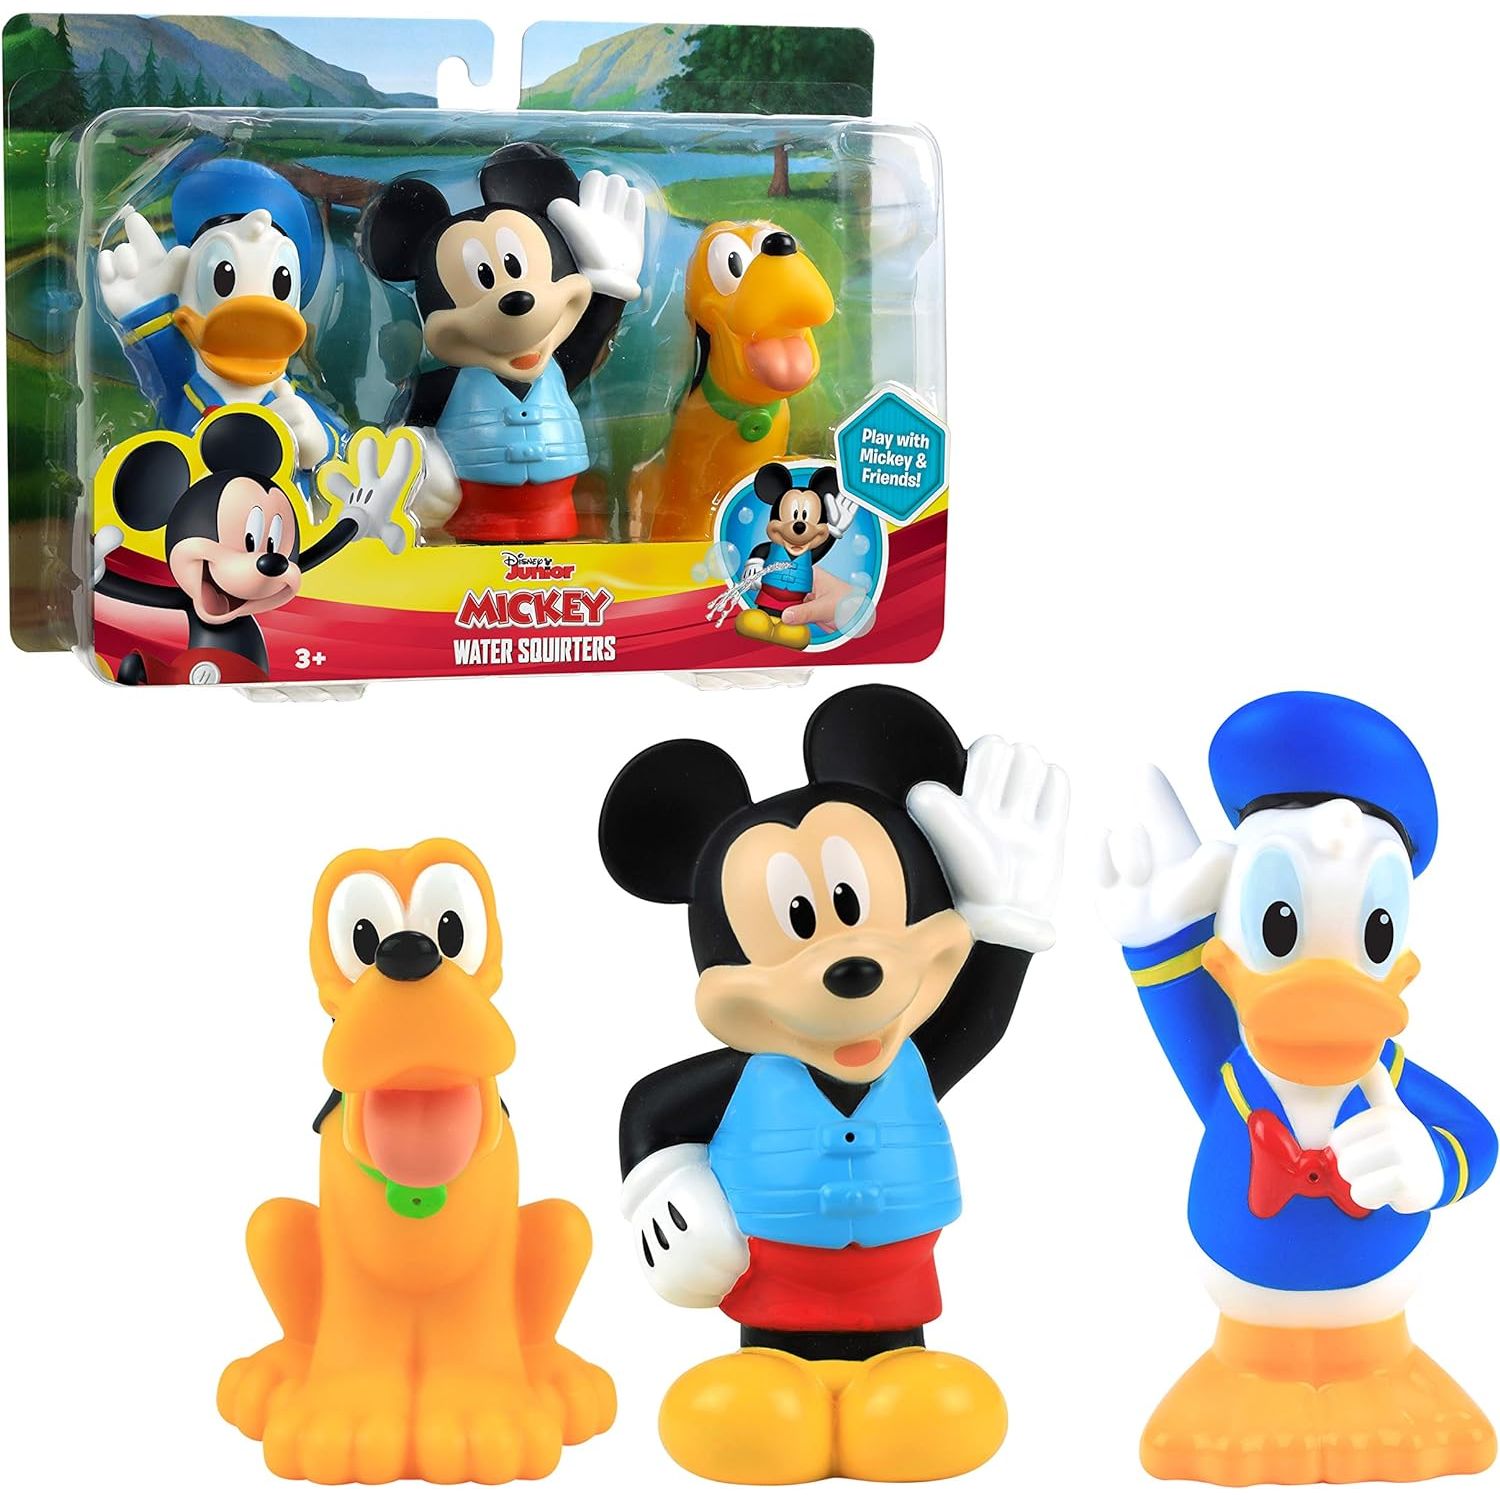 Disney Junior Mickey Mouse Bath Toy Set, Includes Mickey Mouse, Donald Duck, and Pluto Water Toys